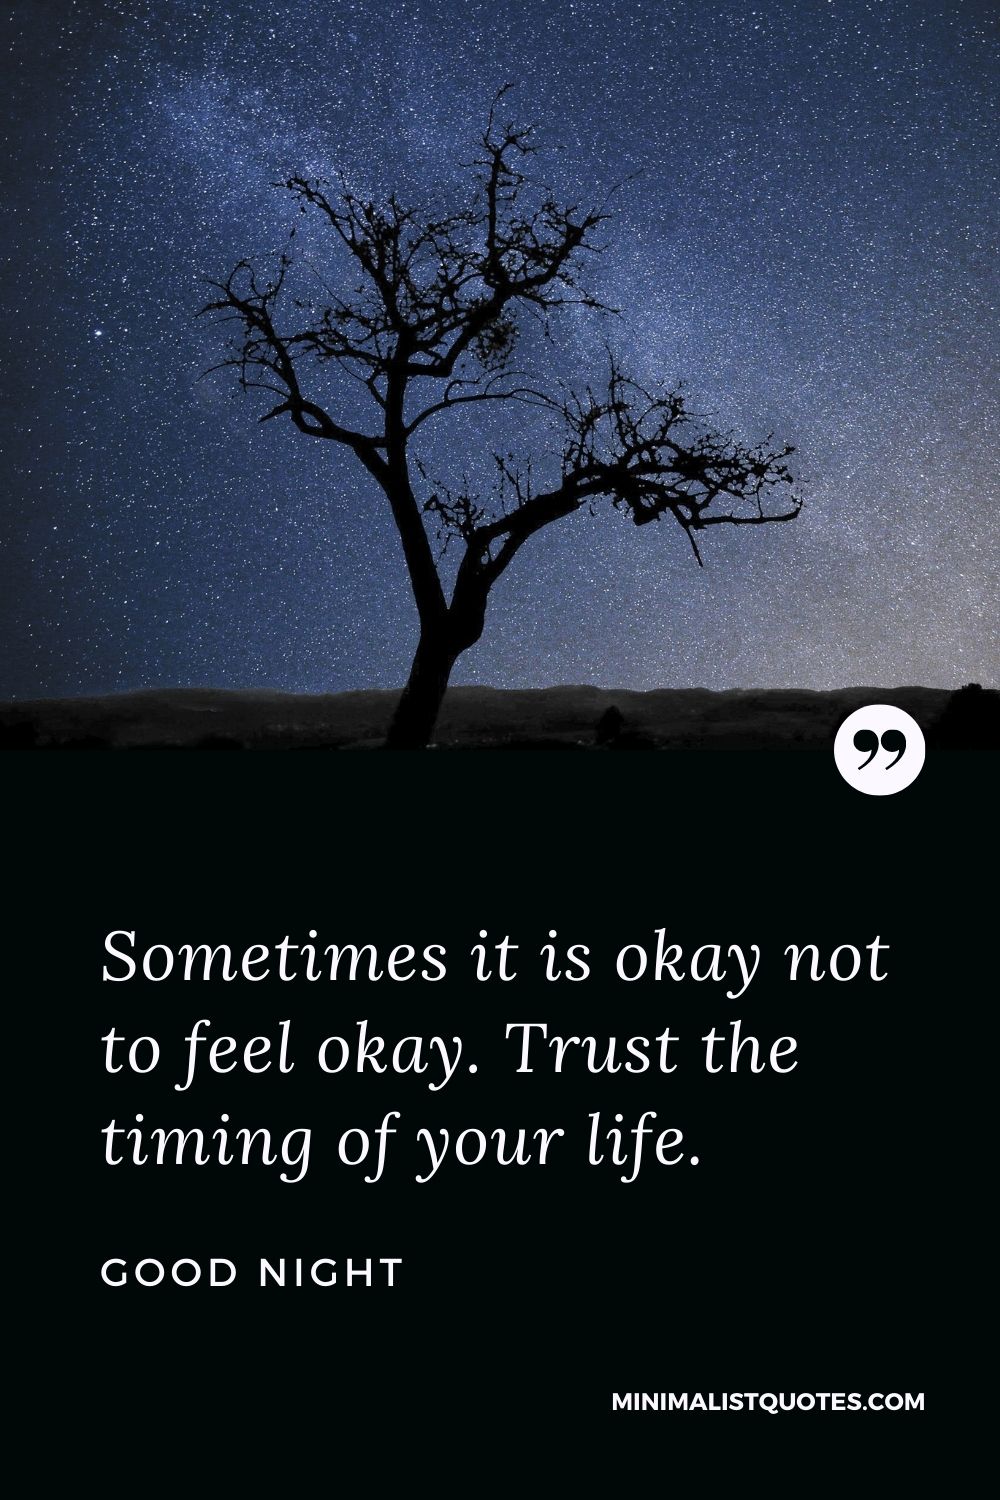 Good Night Wishes - Sometimes it is okay not to feel okay. Trust the timing of your life.